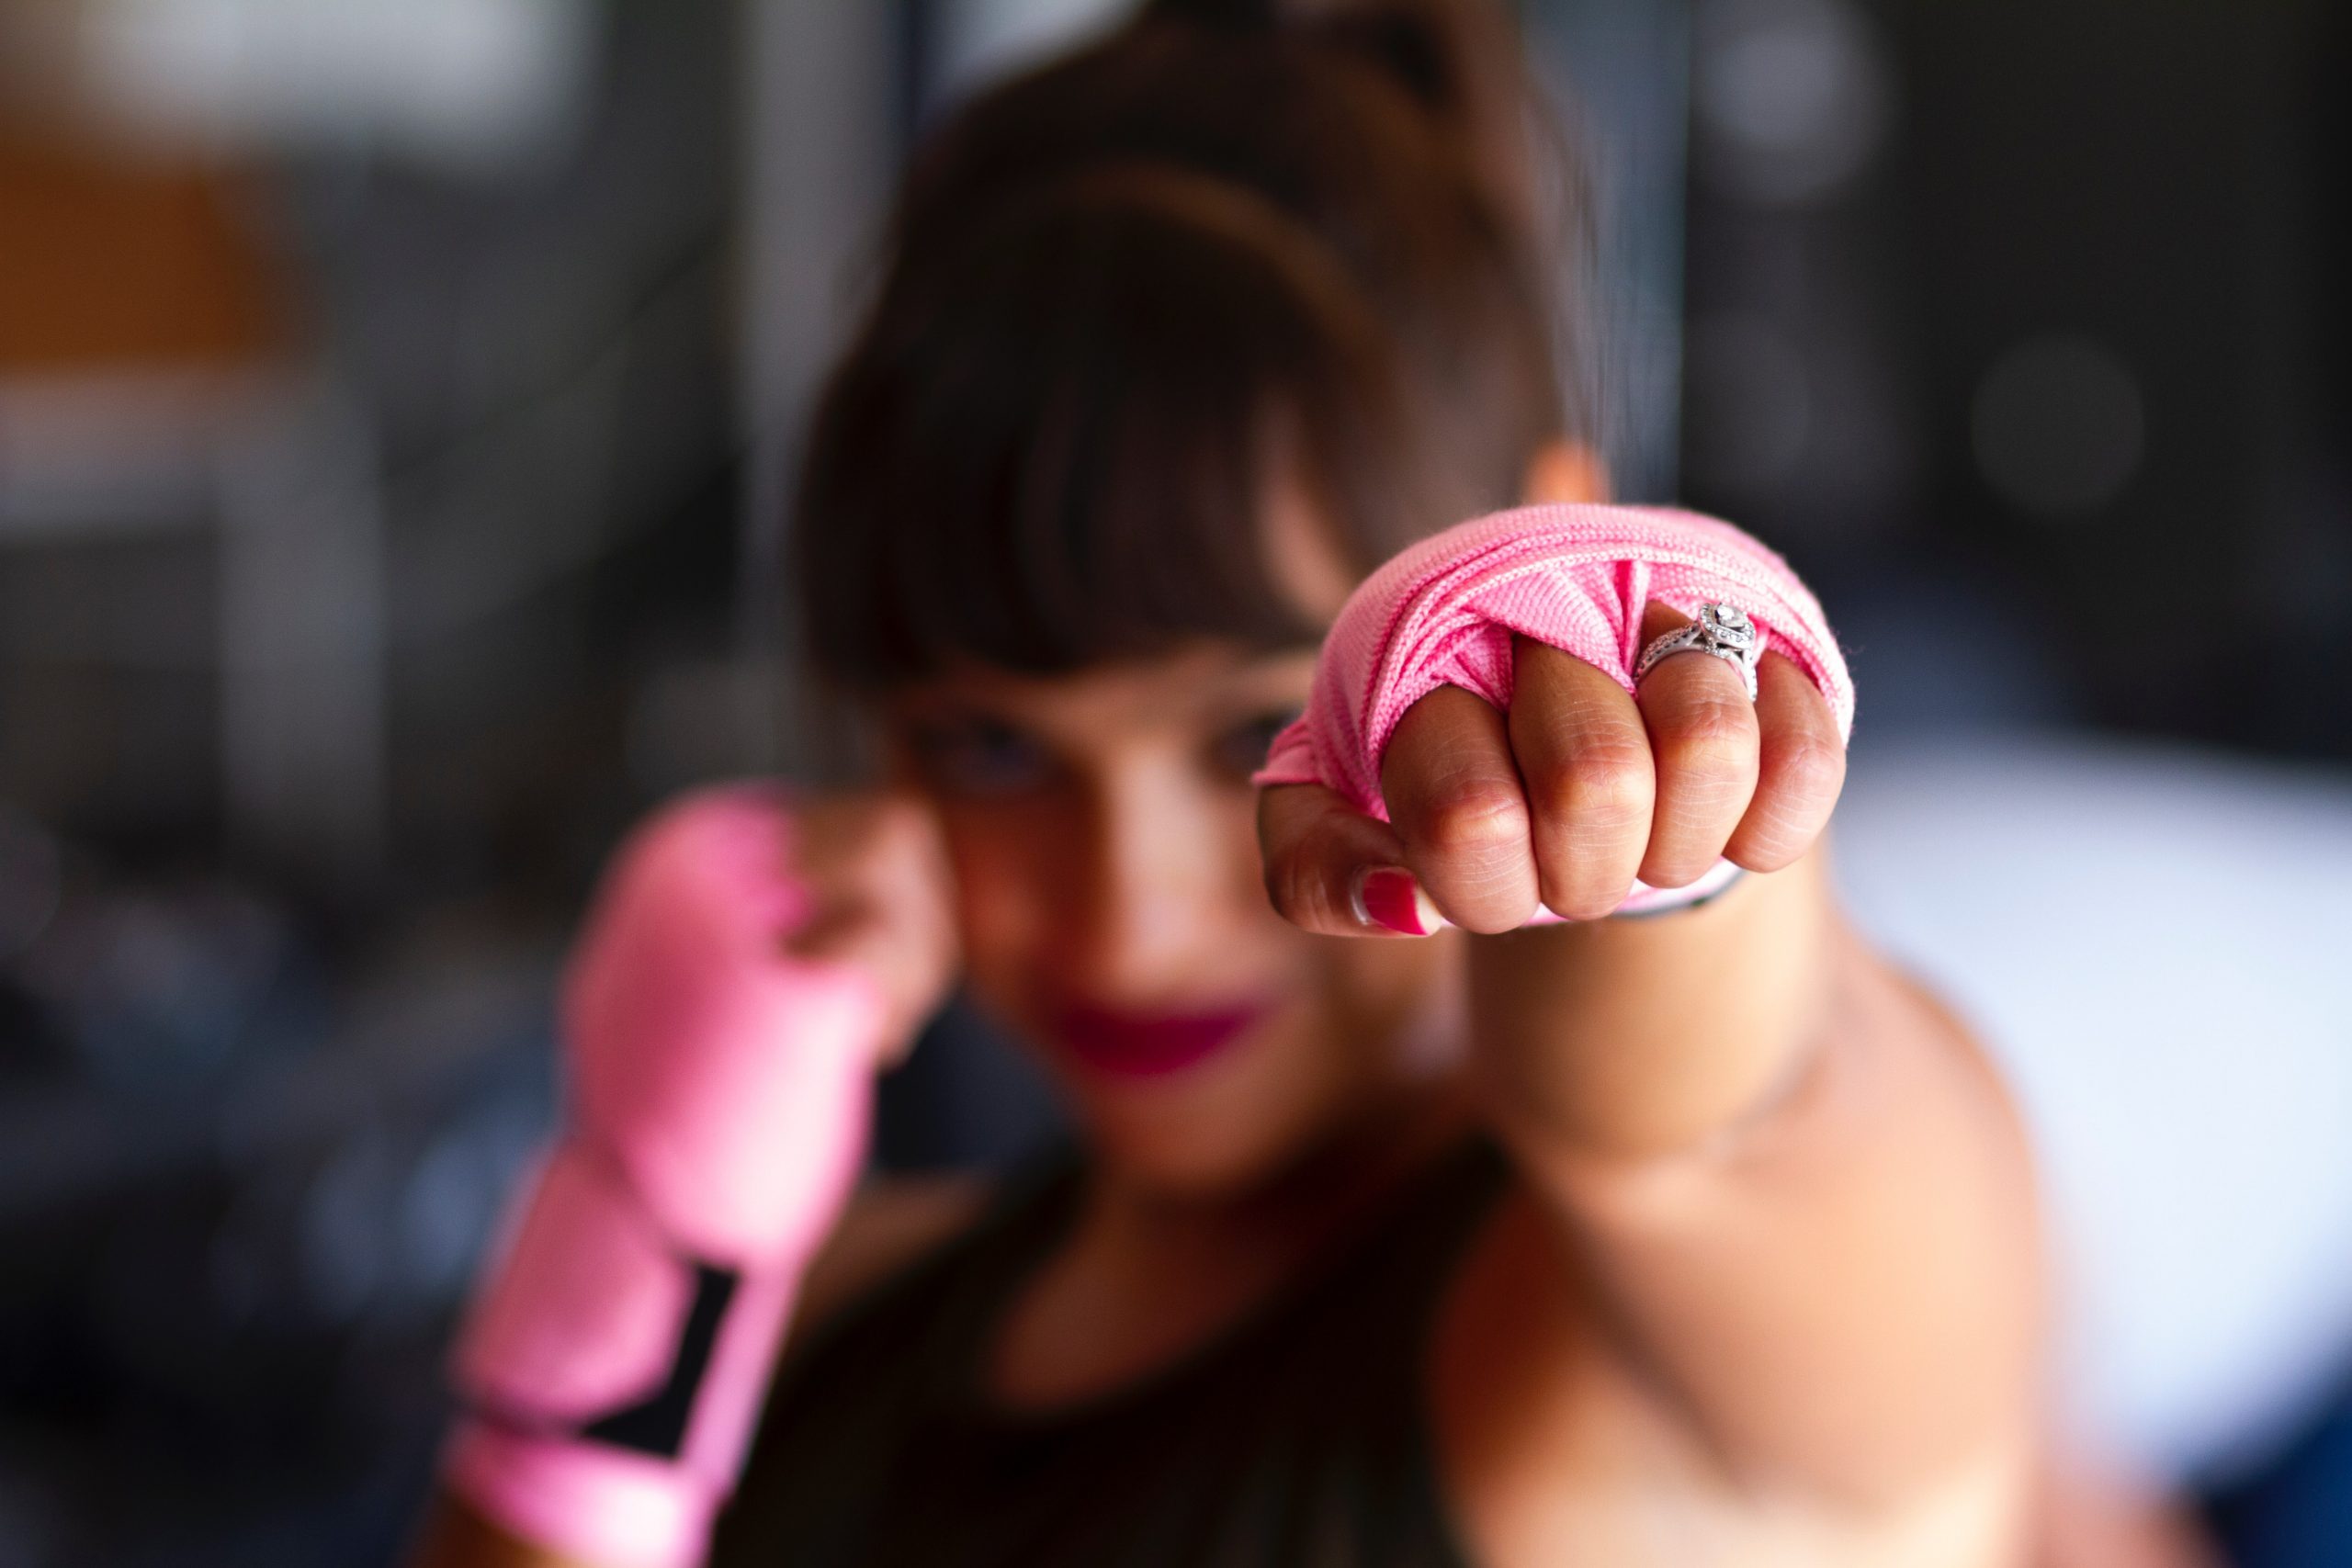 A woman in kickboxing gear with an engagemeent ring